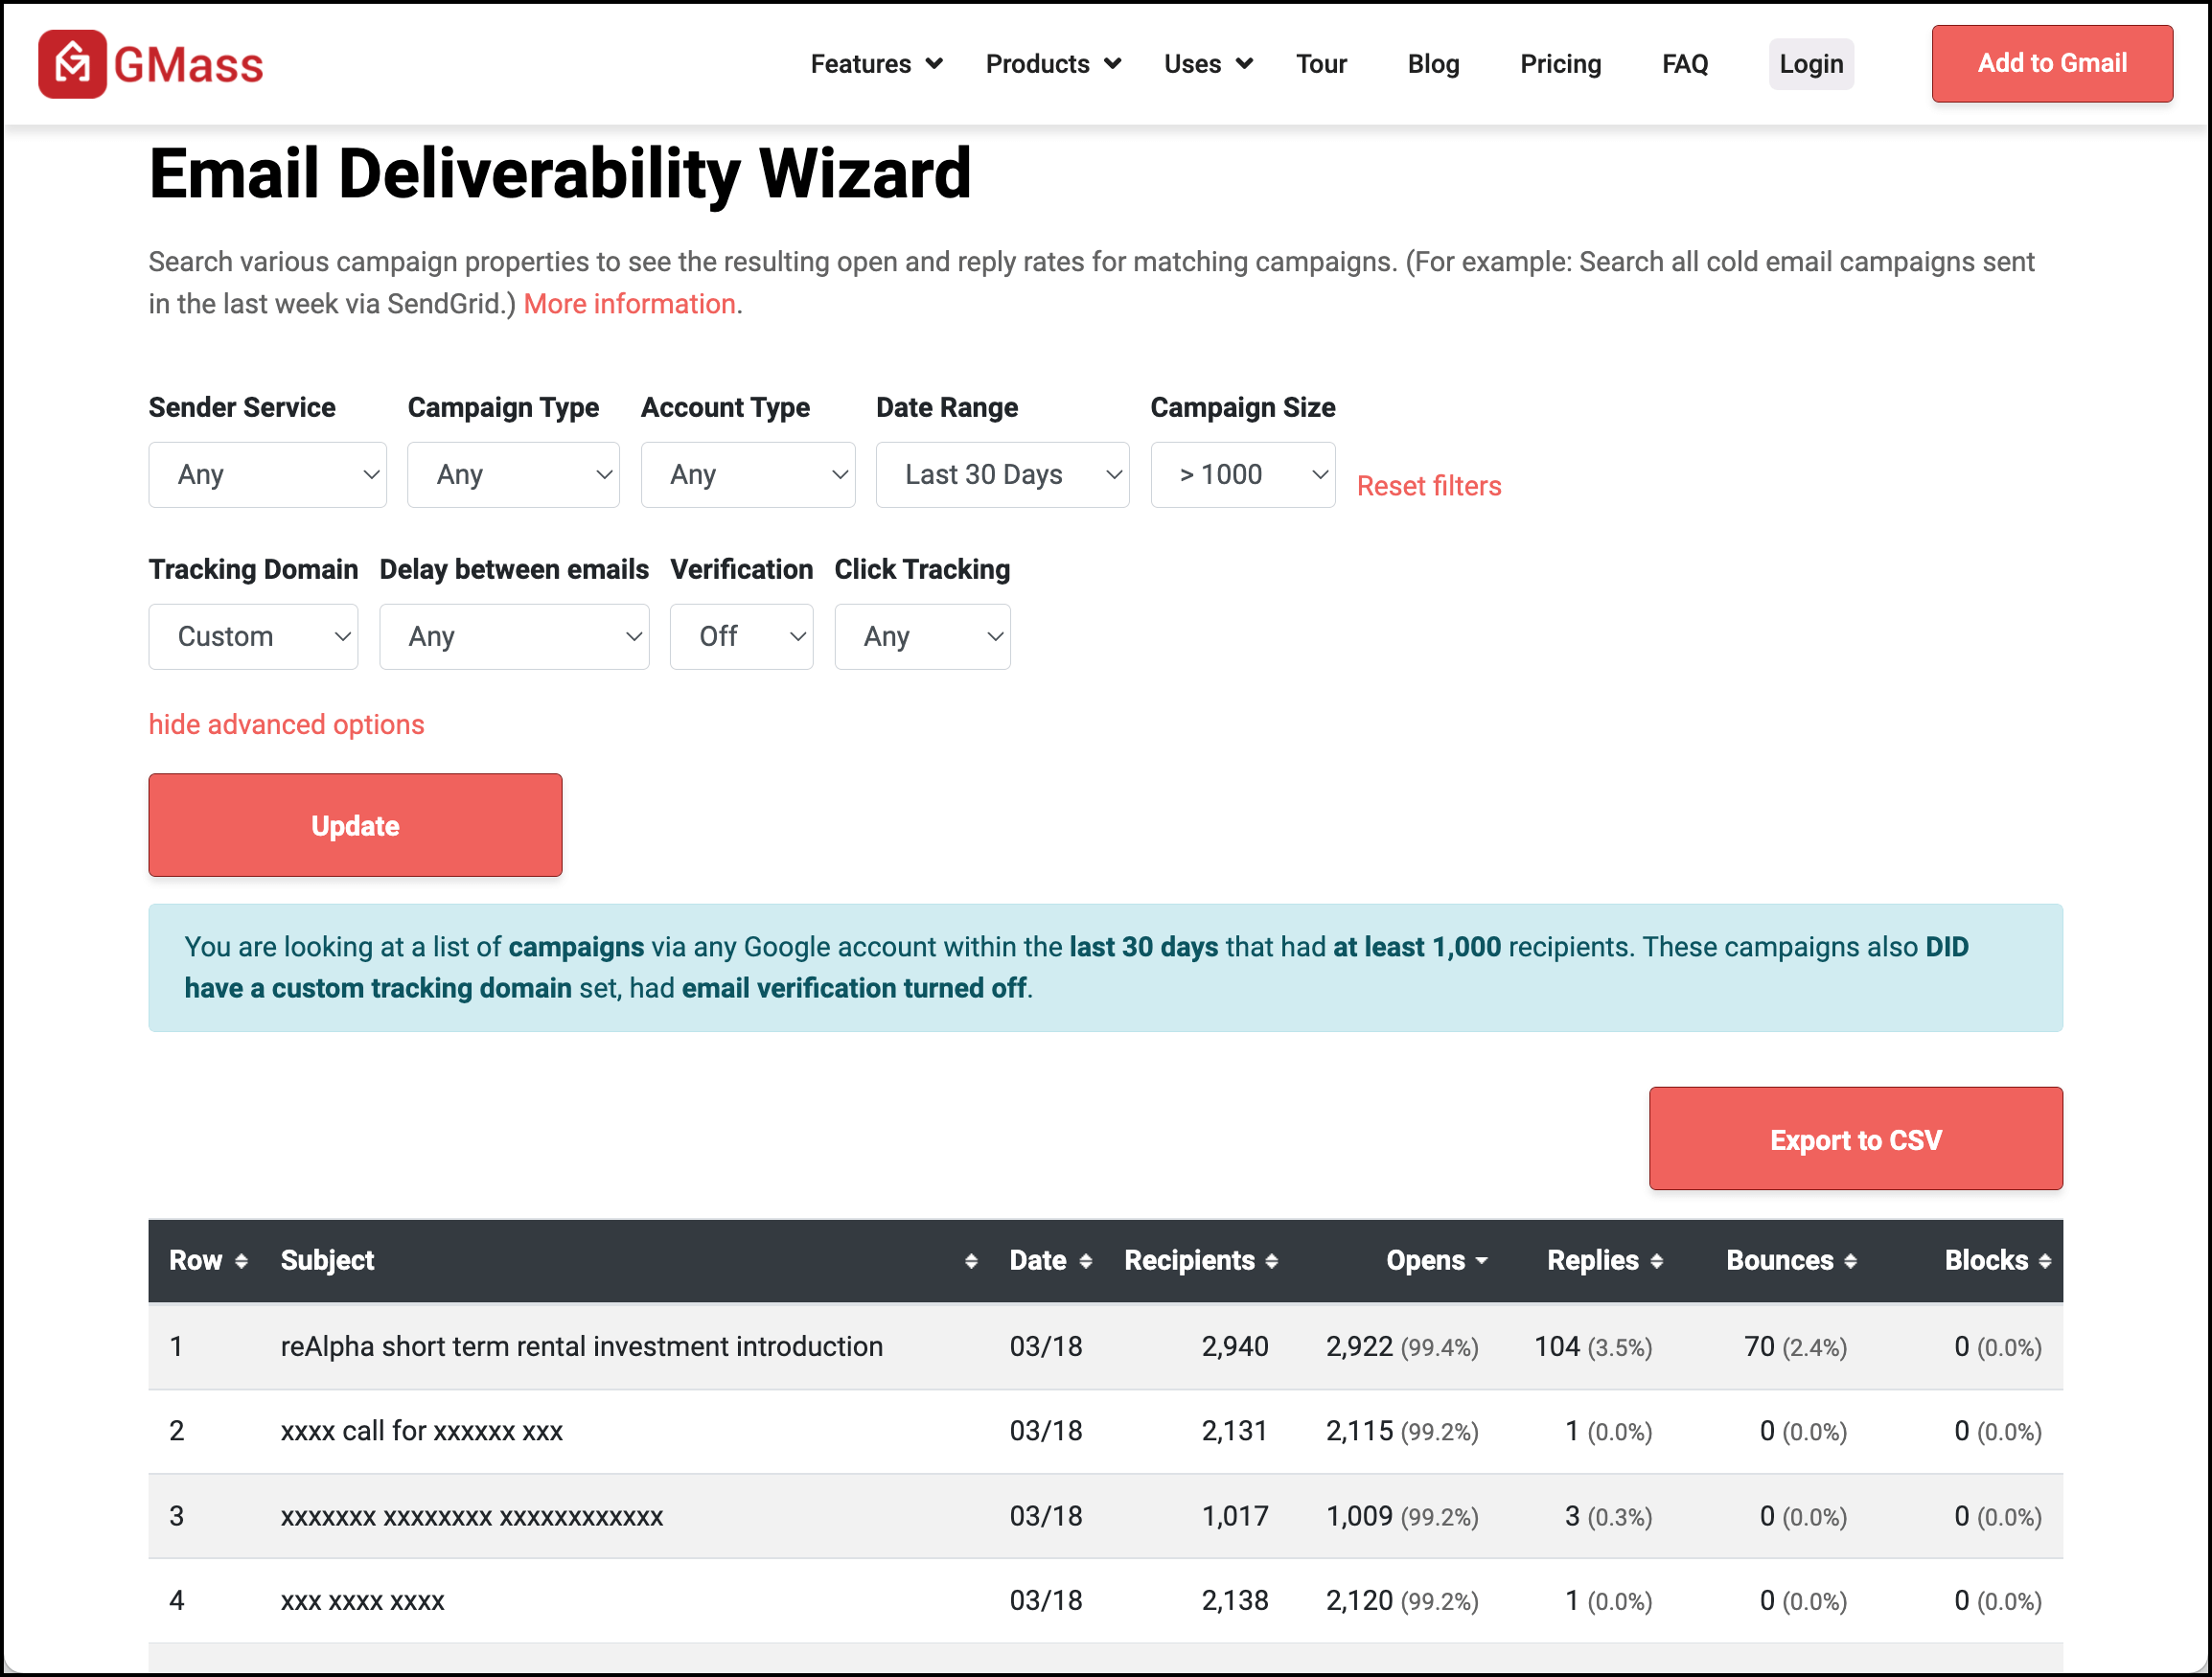 Search other email success rates with the Email Deliverability Wizard